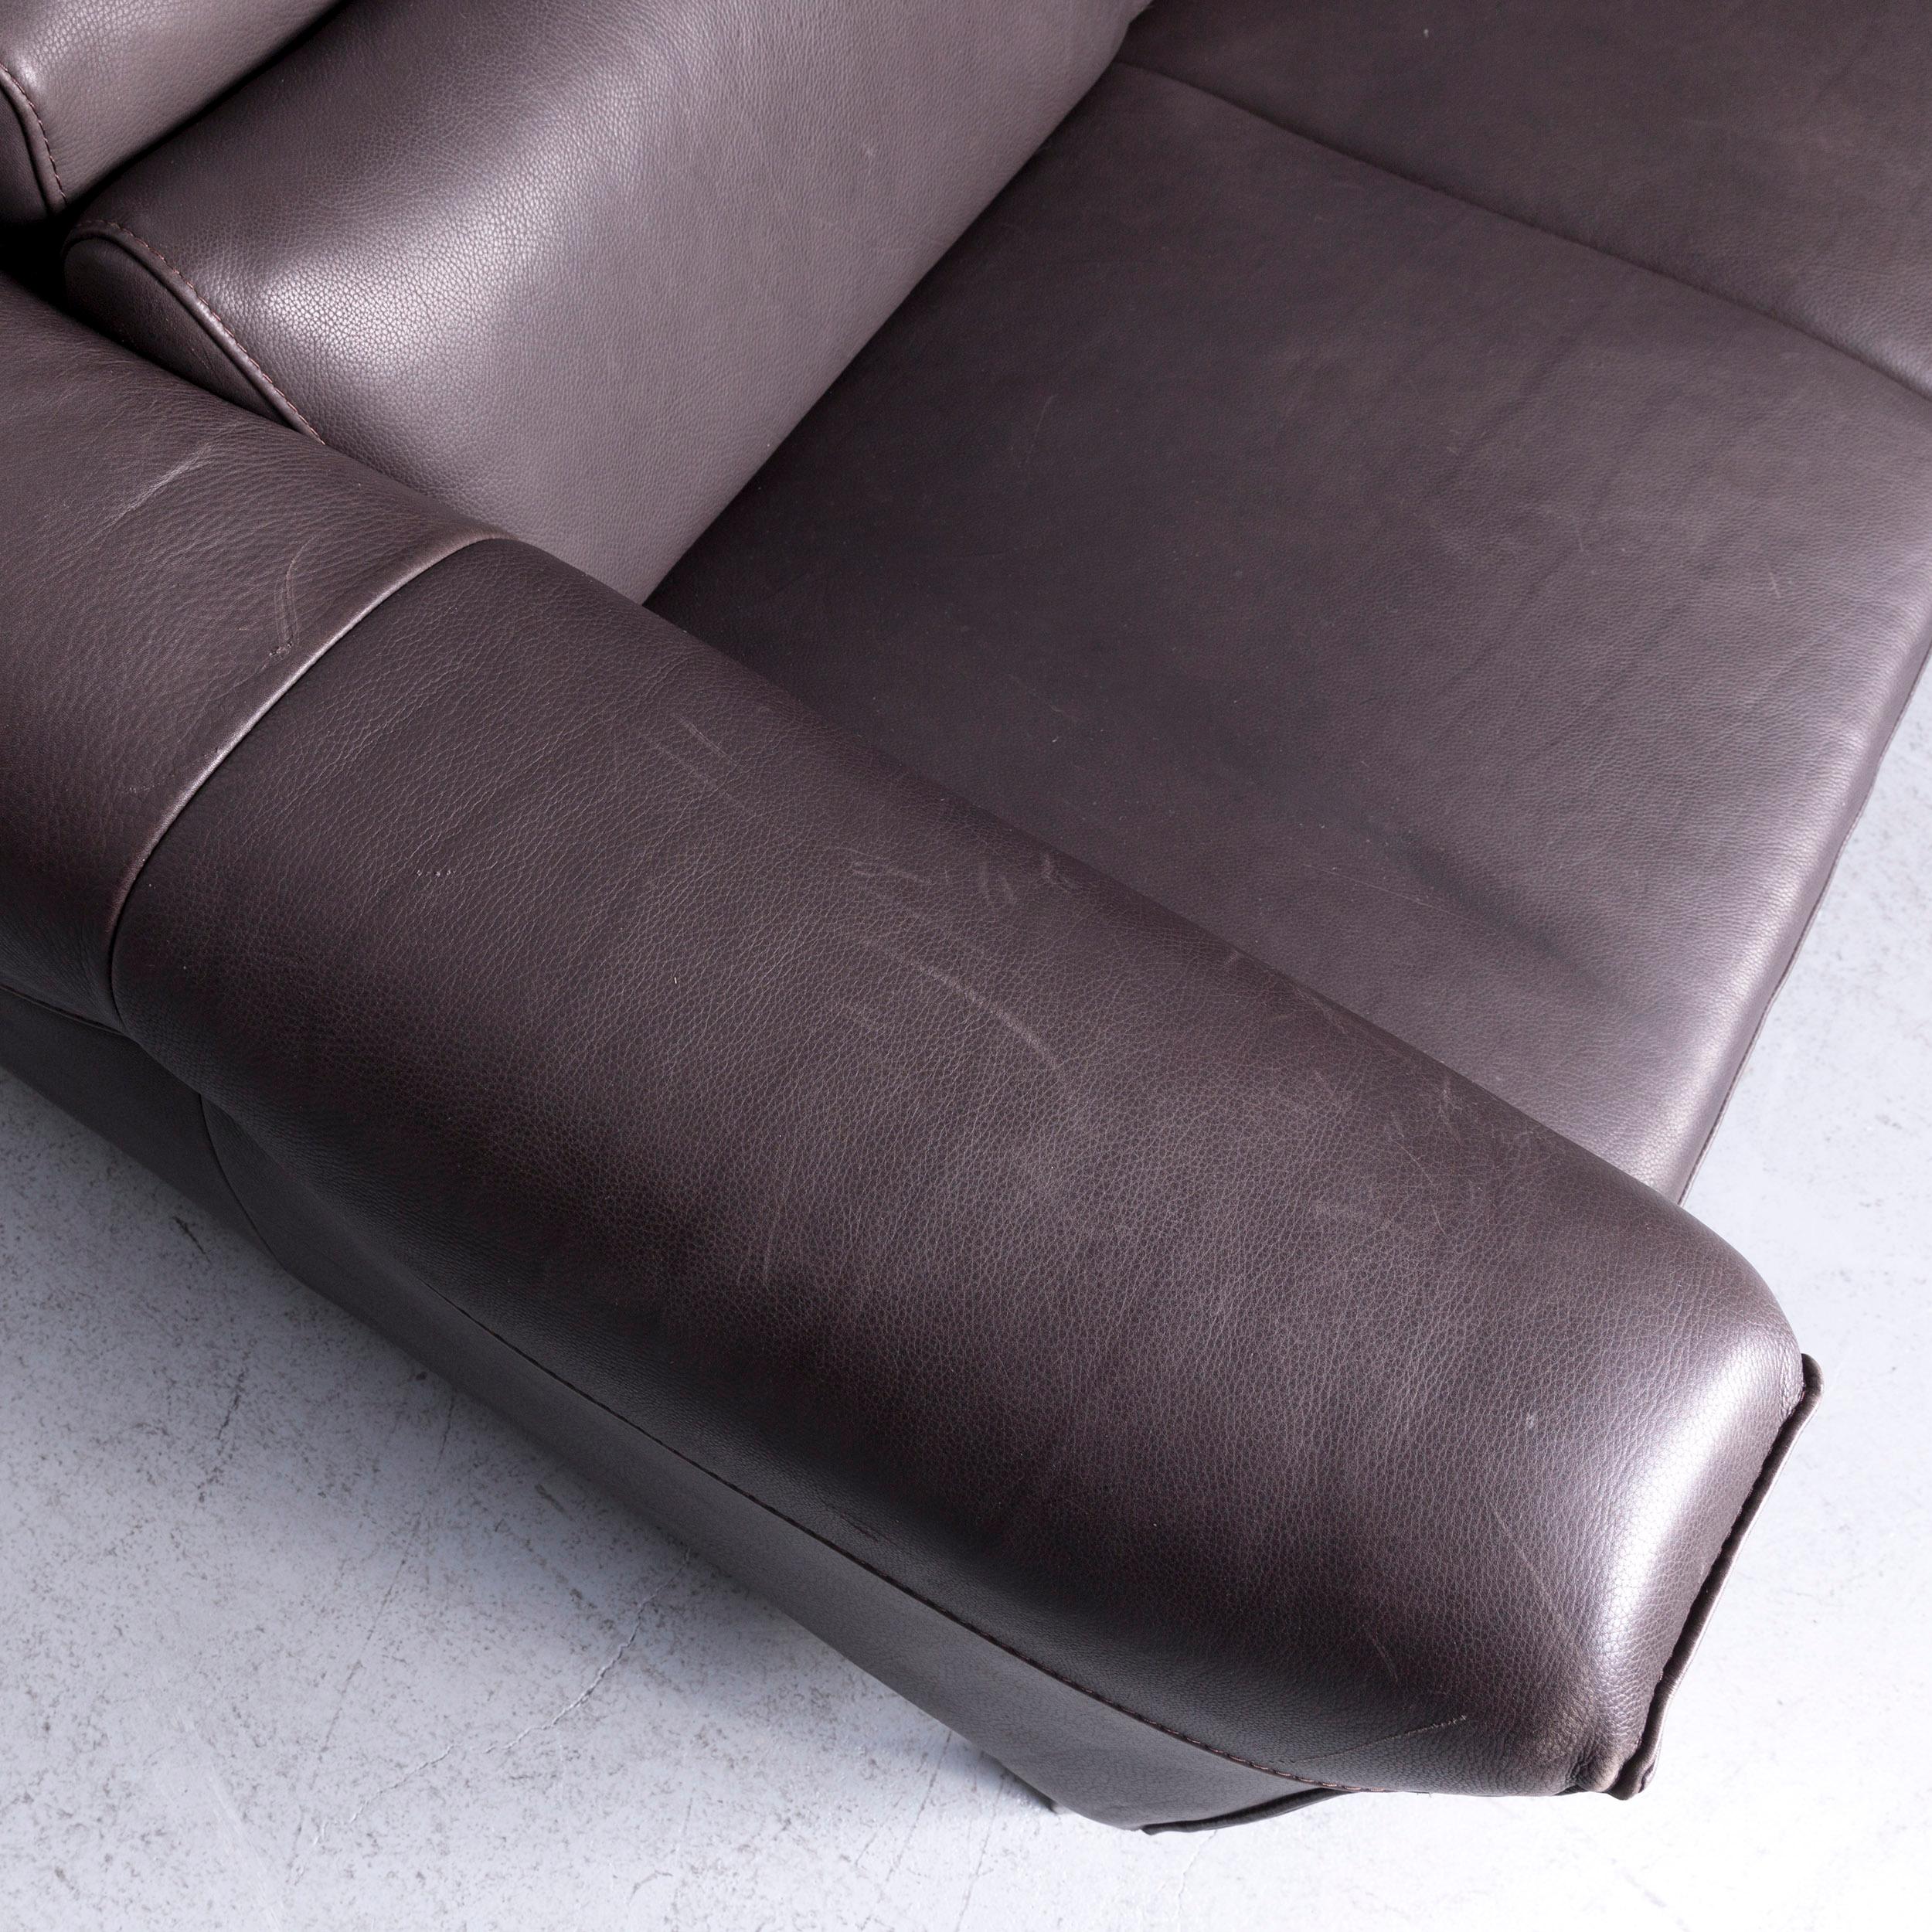 Natuzzi Designer Leather Sofa Two-Seat Couch Brown 1